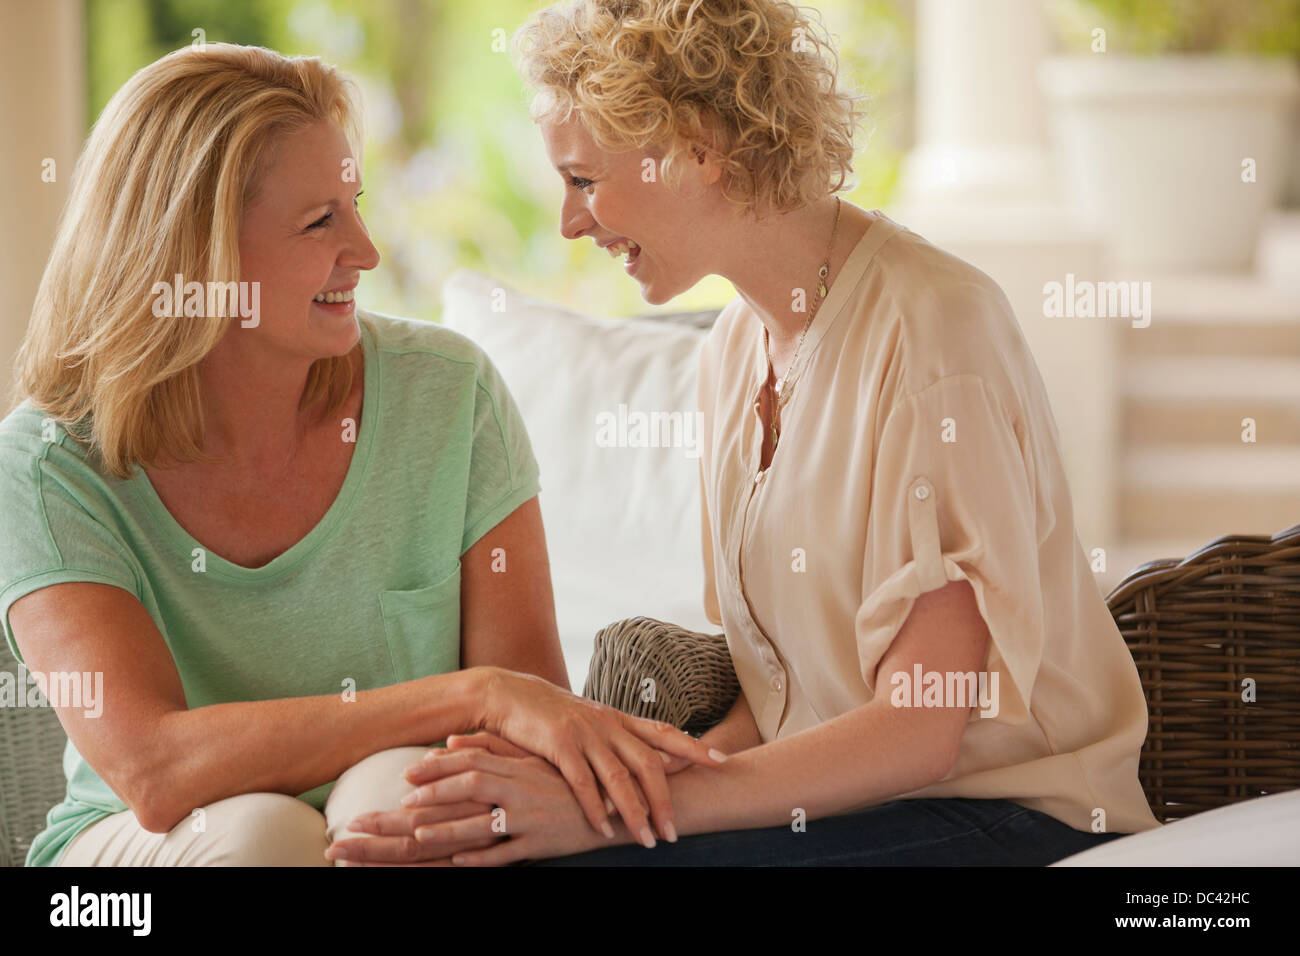 Smiling mother and daughter holding hands on porch Banque D'Images